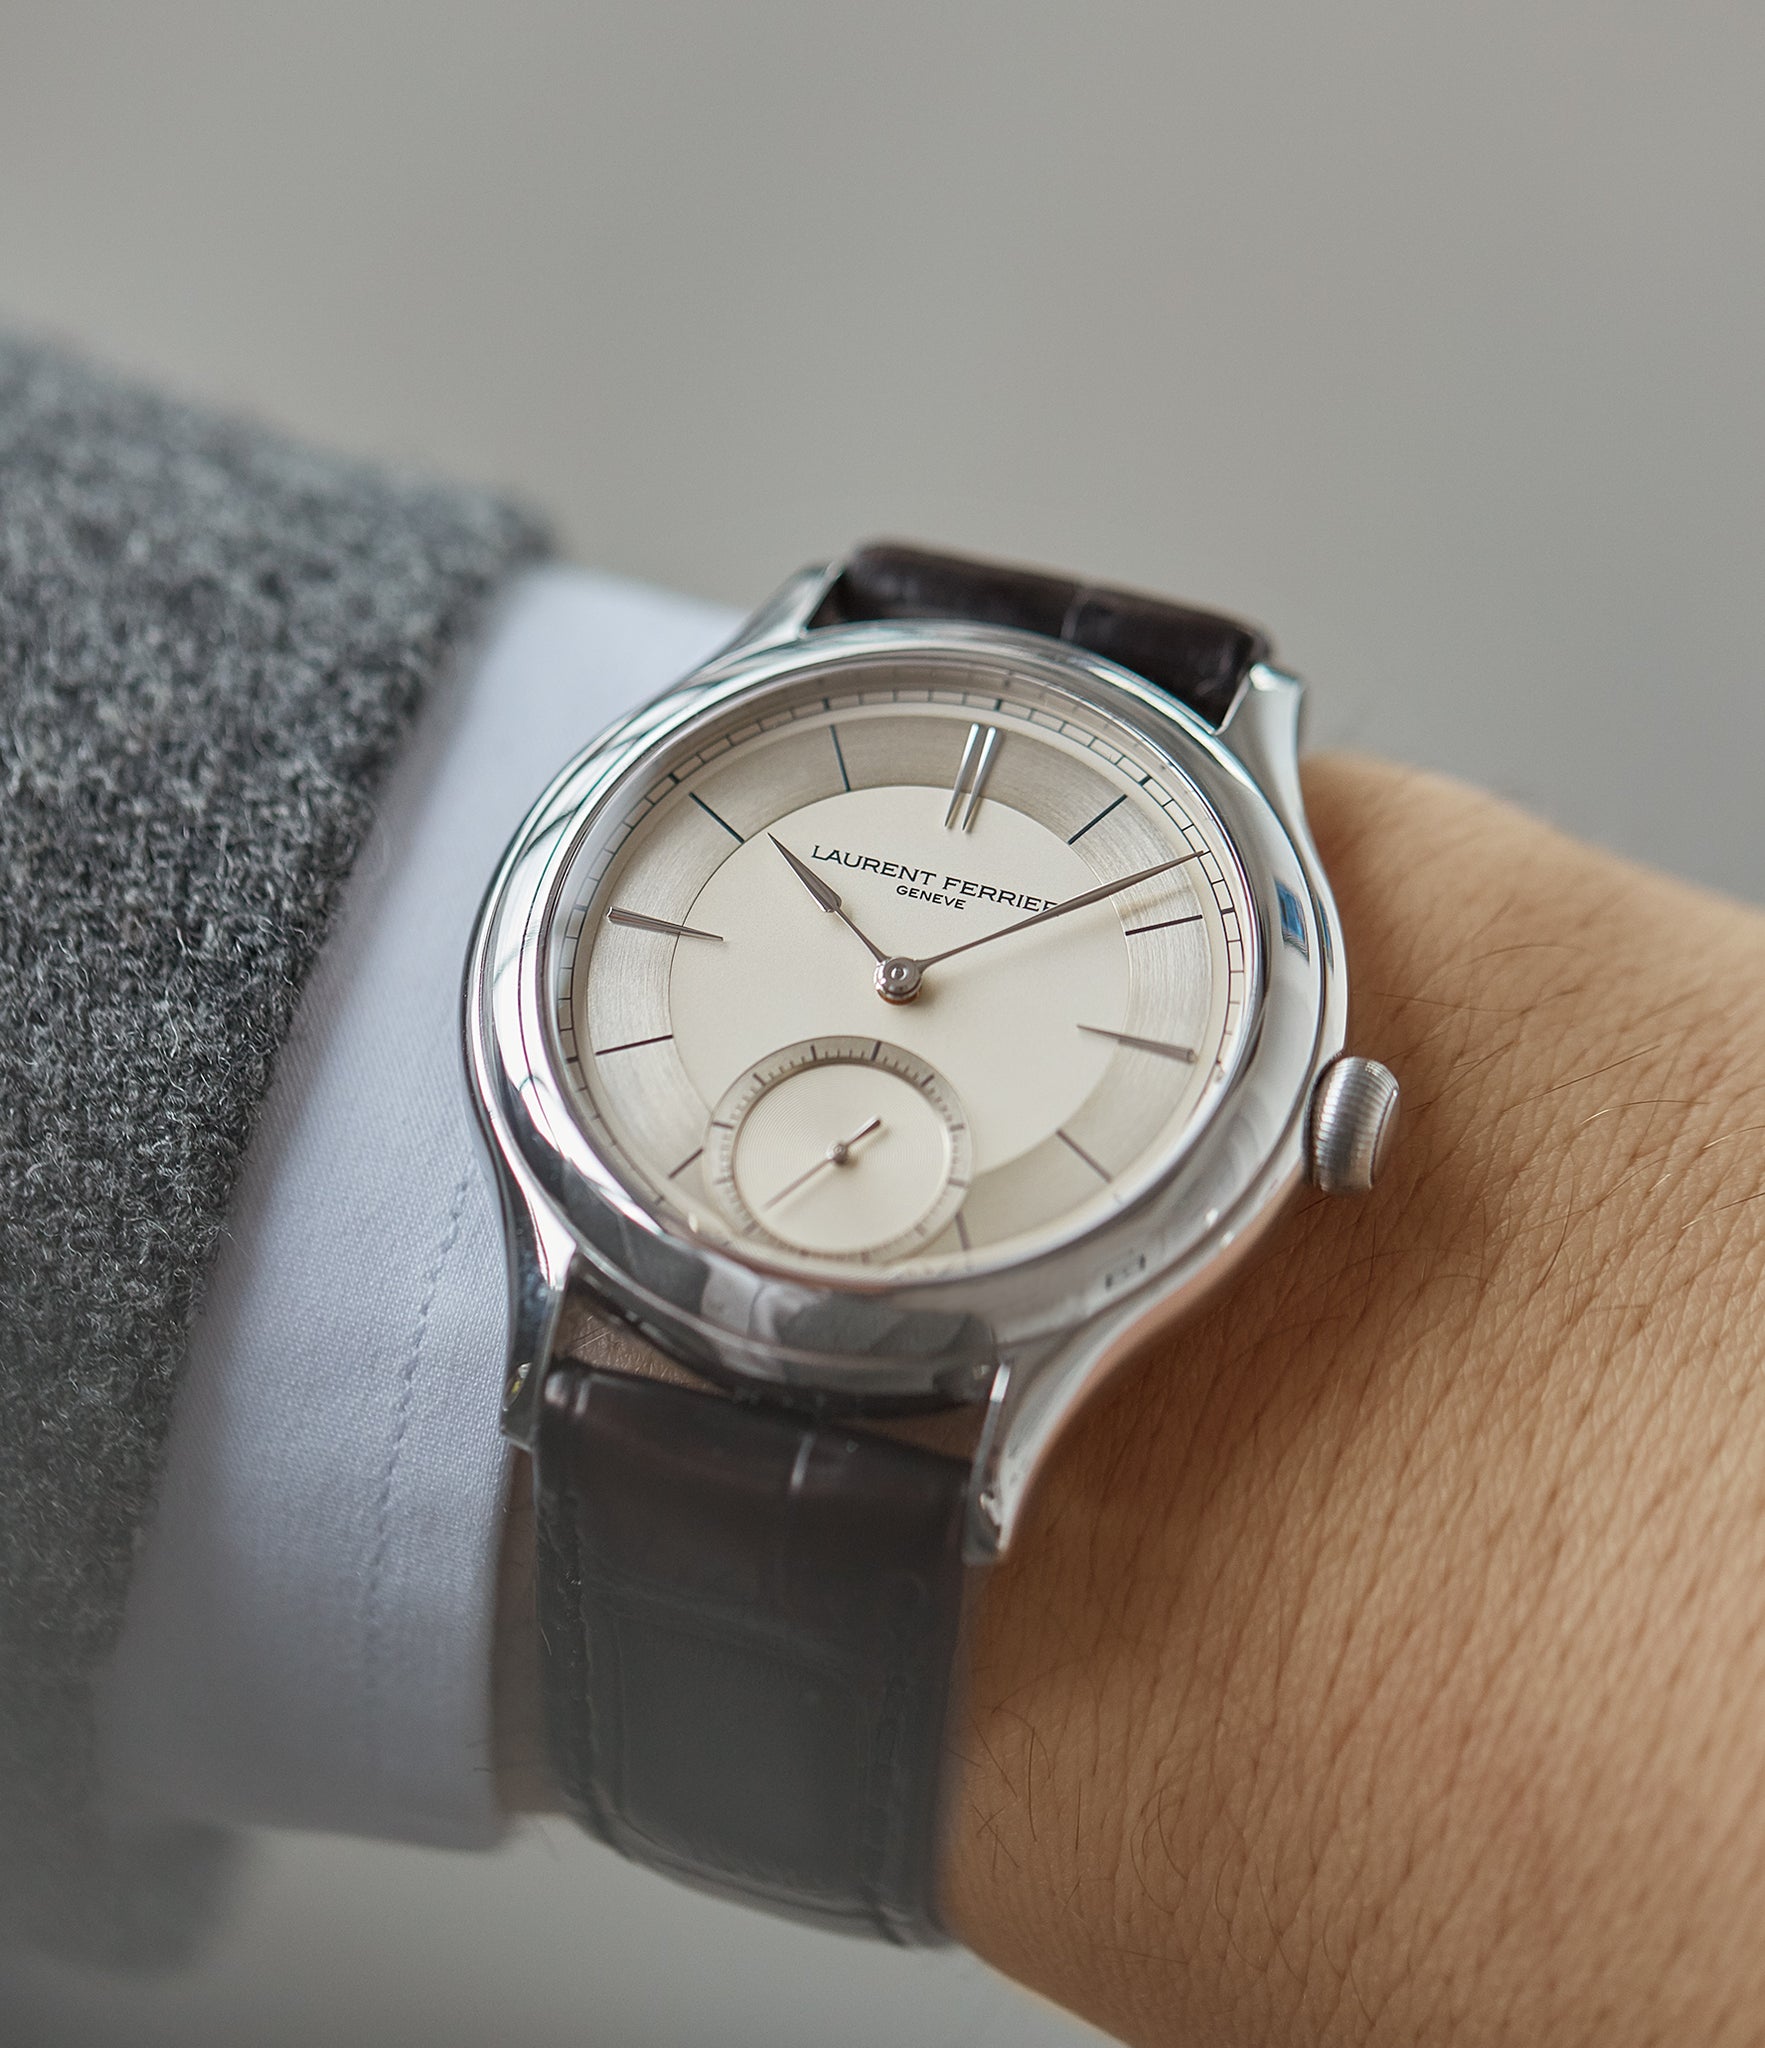 men's modern classic watch Laurent Ferrier Galet Micro-rotor 40 mm platinum time-only dress watch from independent watchmaker for sale online at A Collected Man London UK specialist of rare watches